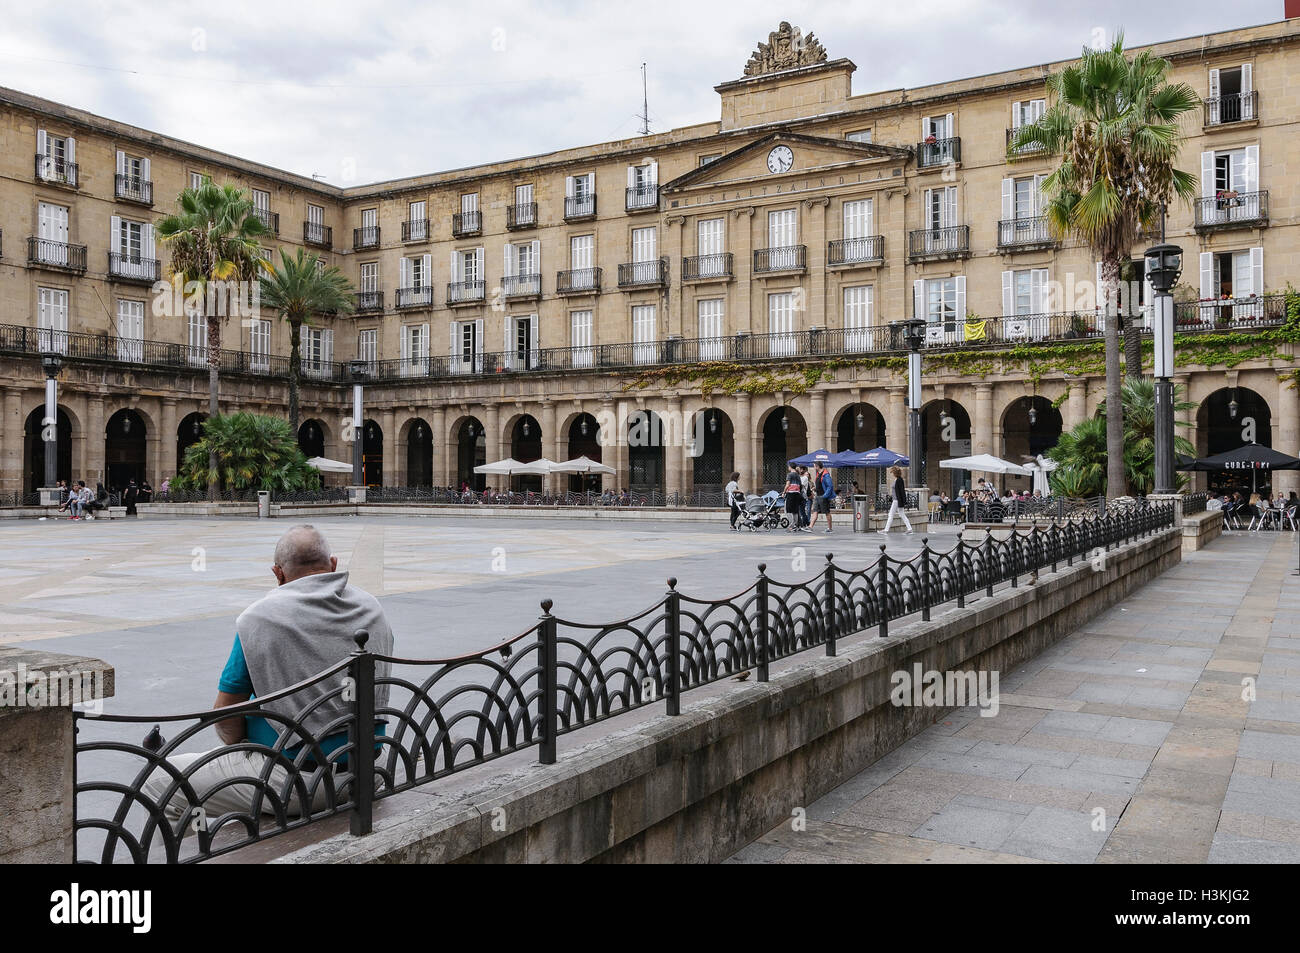 People sitting in Plaza Nueva, Bilbao, Biscay, Basque Country, Spain, Europe Stock Photo